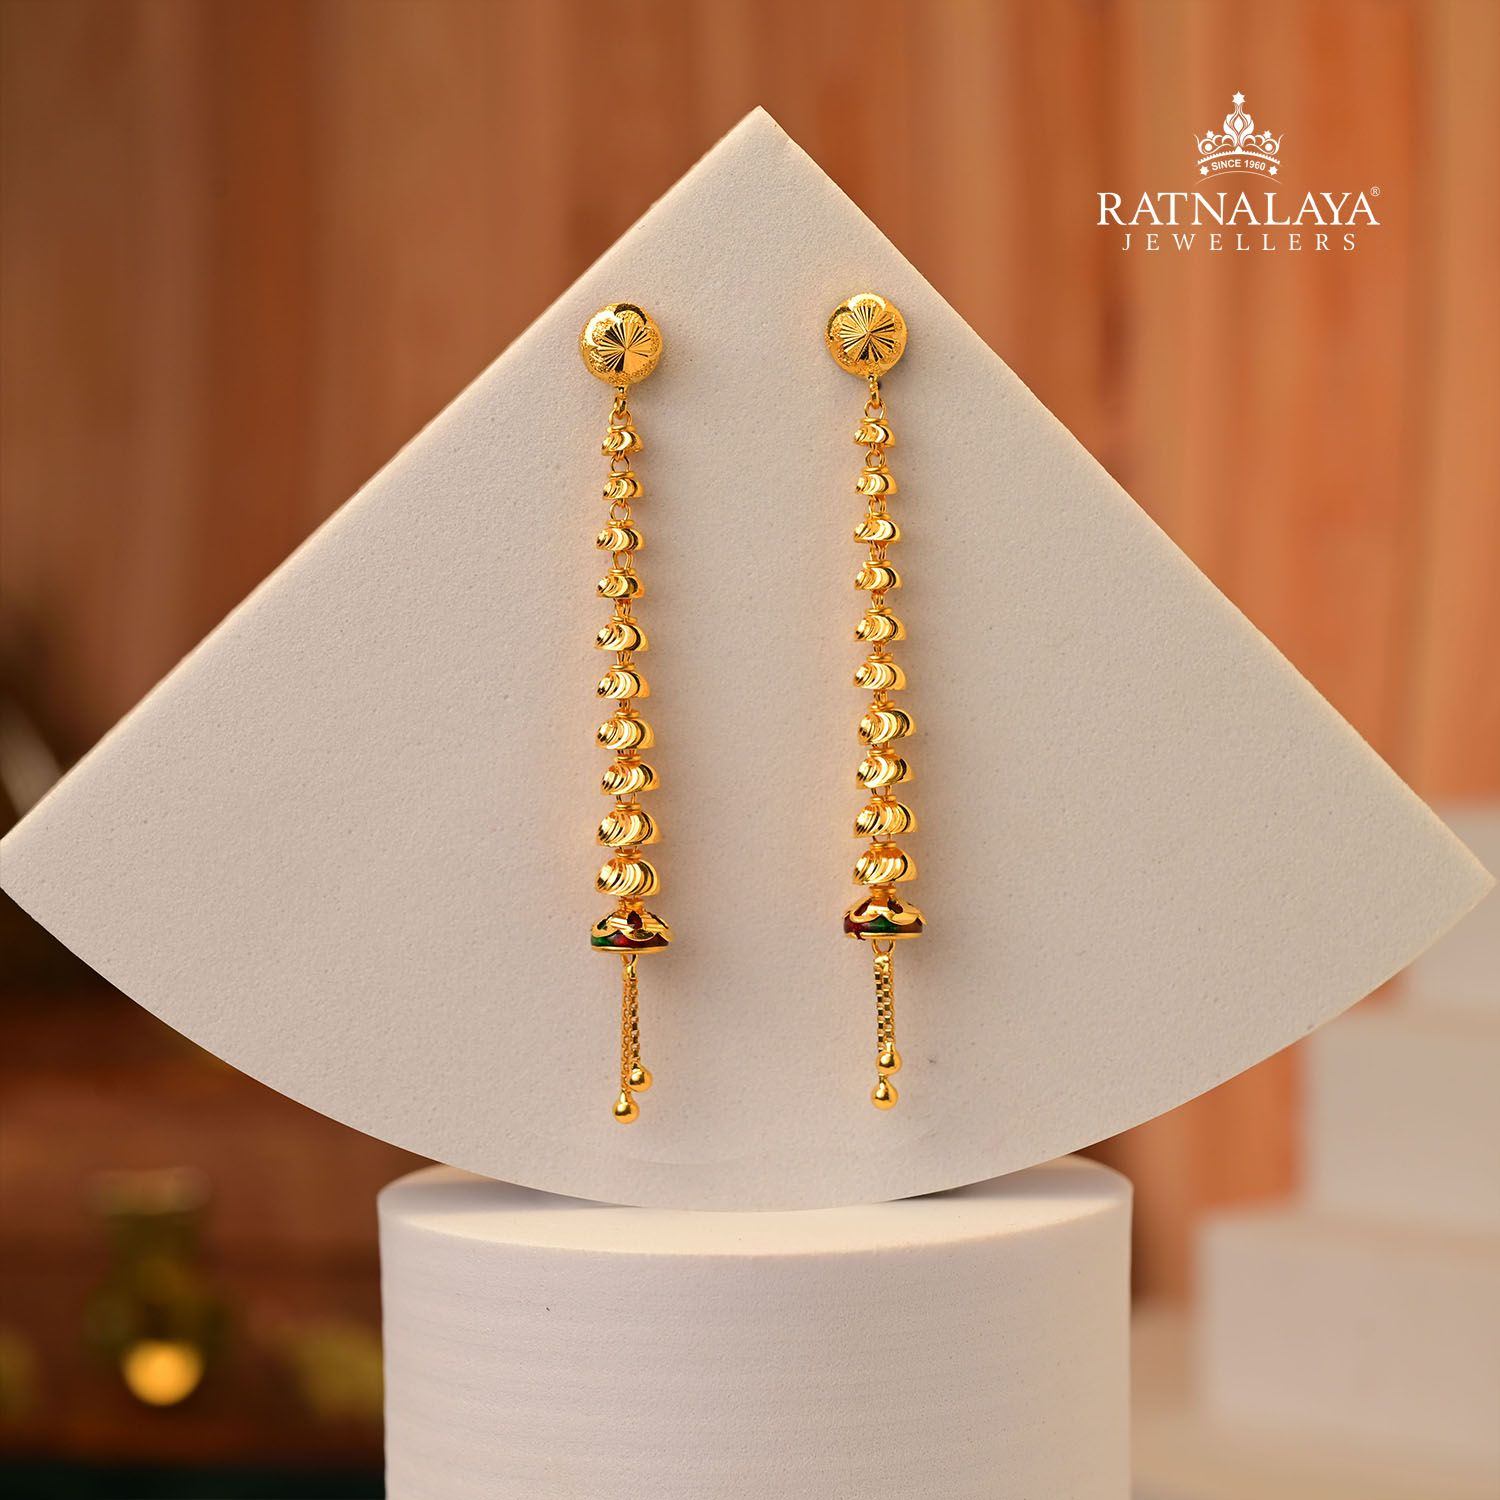 Gold earrings | New gold jewellery designs, Unique gold jewelry designs,  Bridal gold jewellery designs